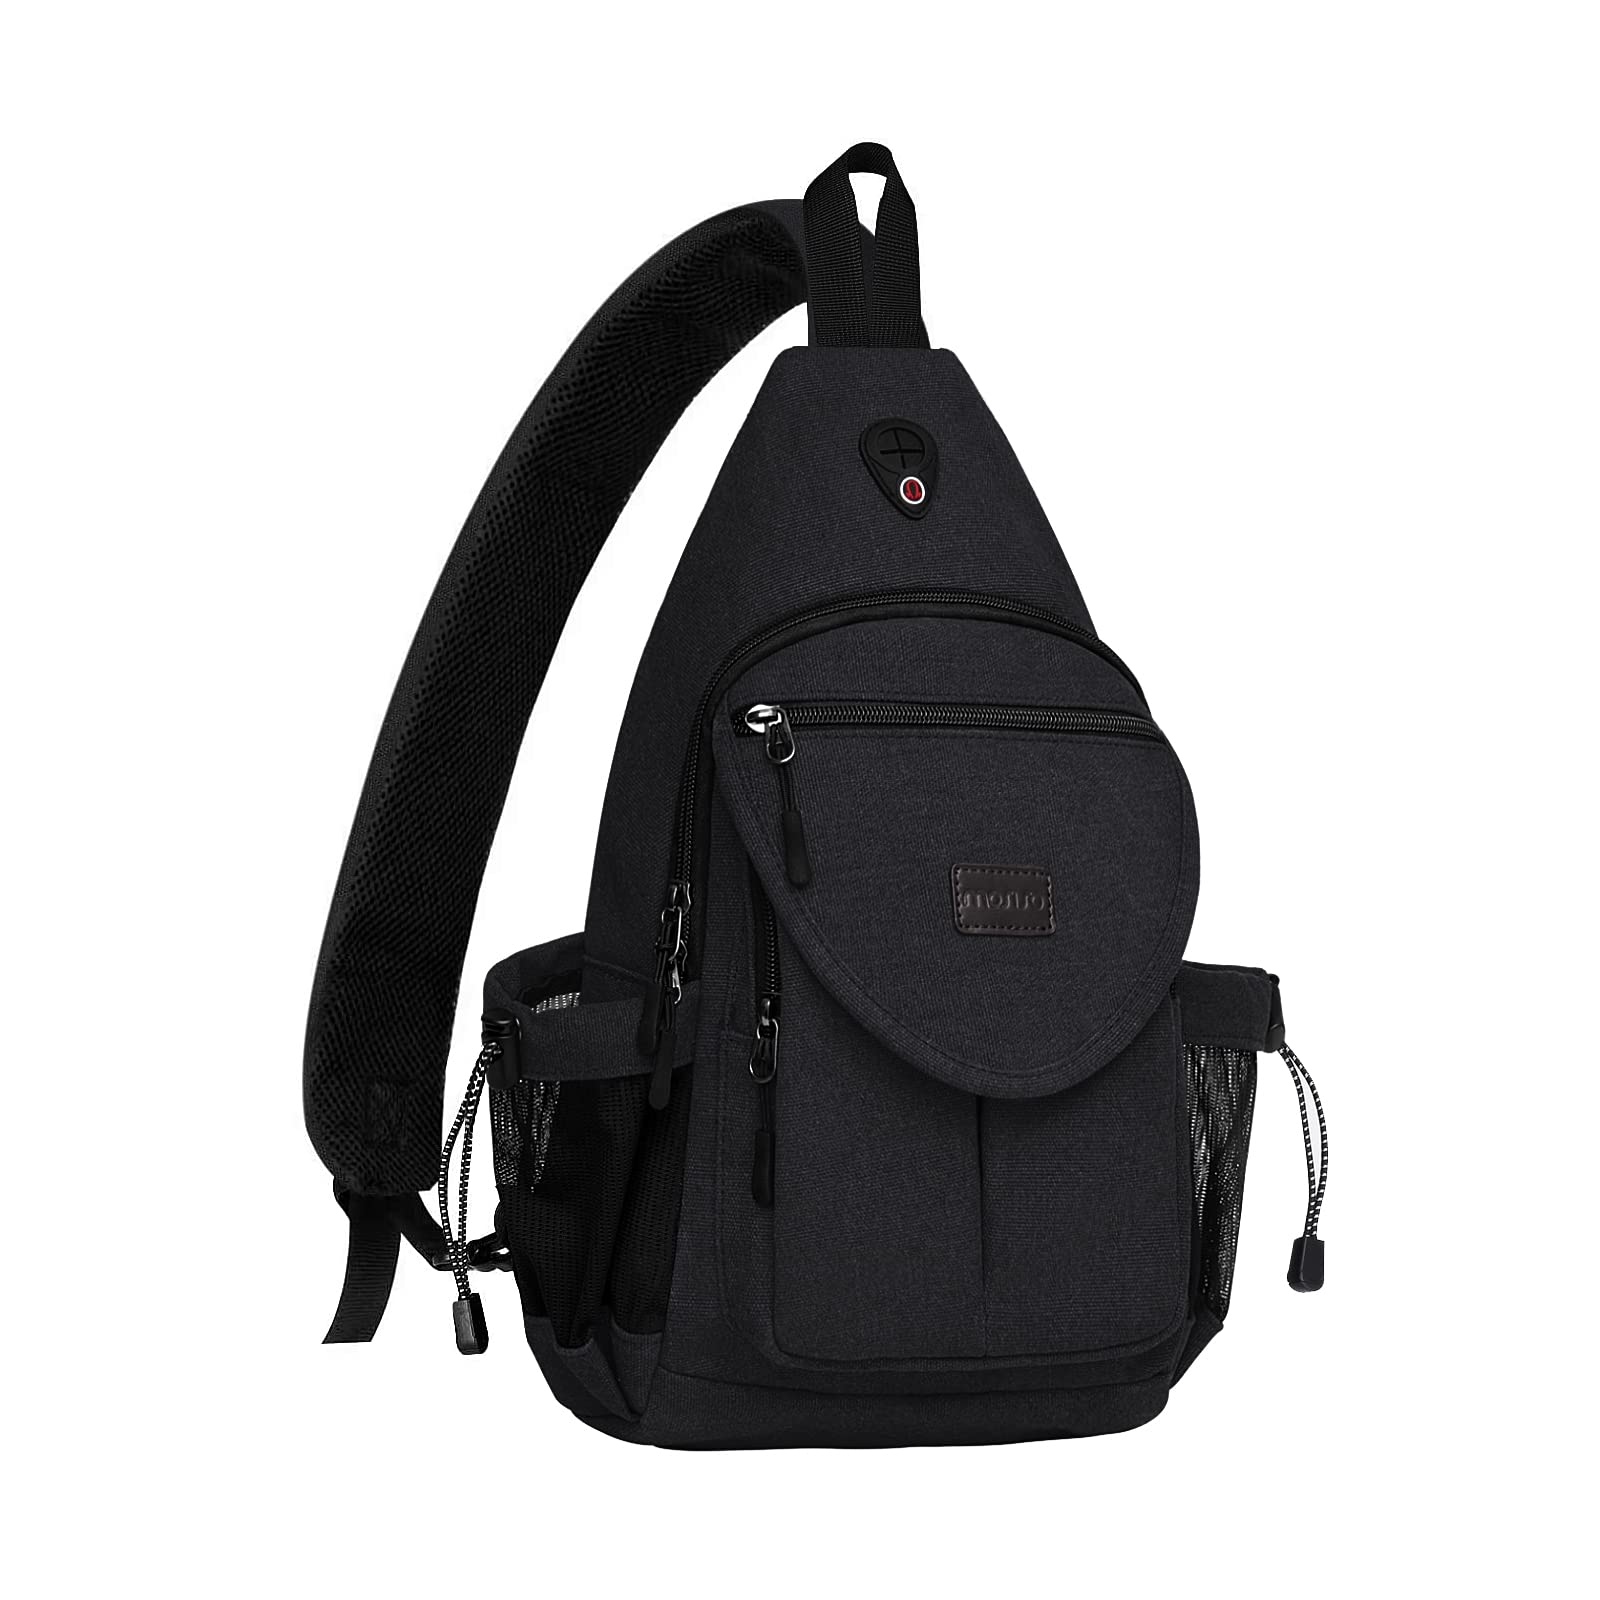 MOSISO Sling Backpack Canvas Crossbody Hiking Daypack Bag with Anti-theft  Pocket Black